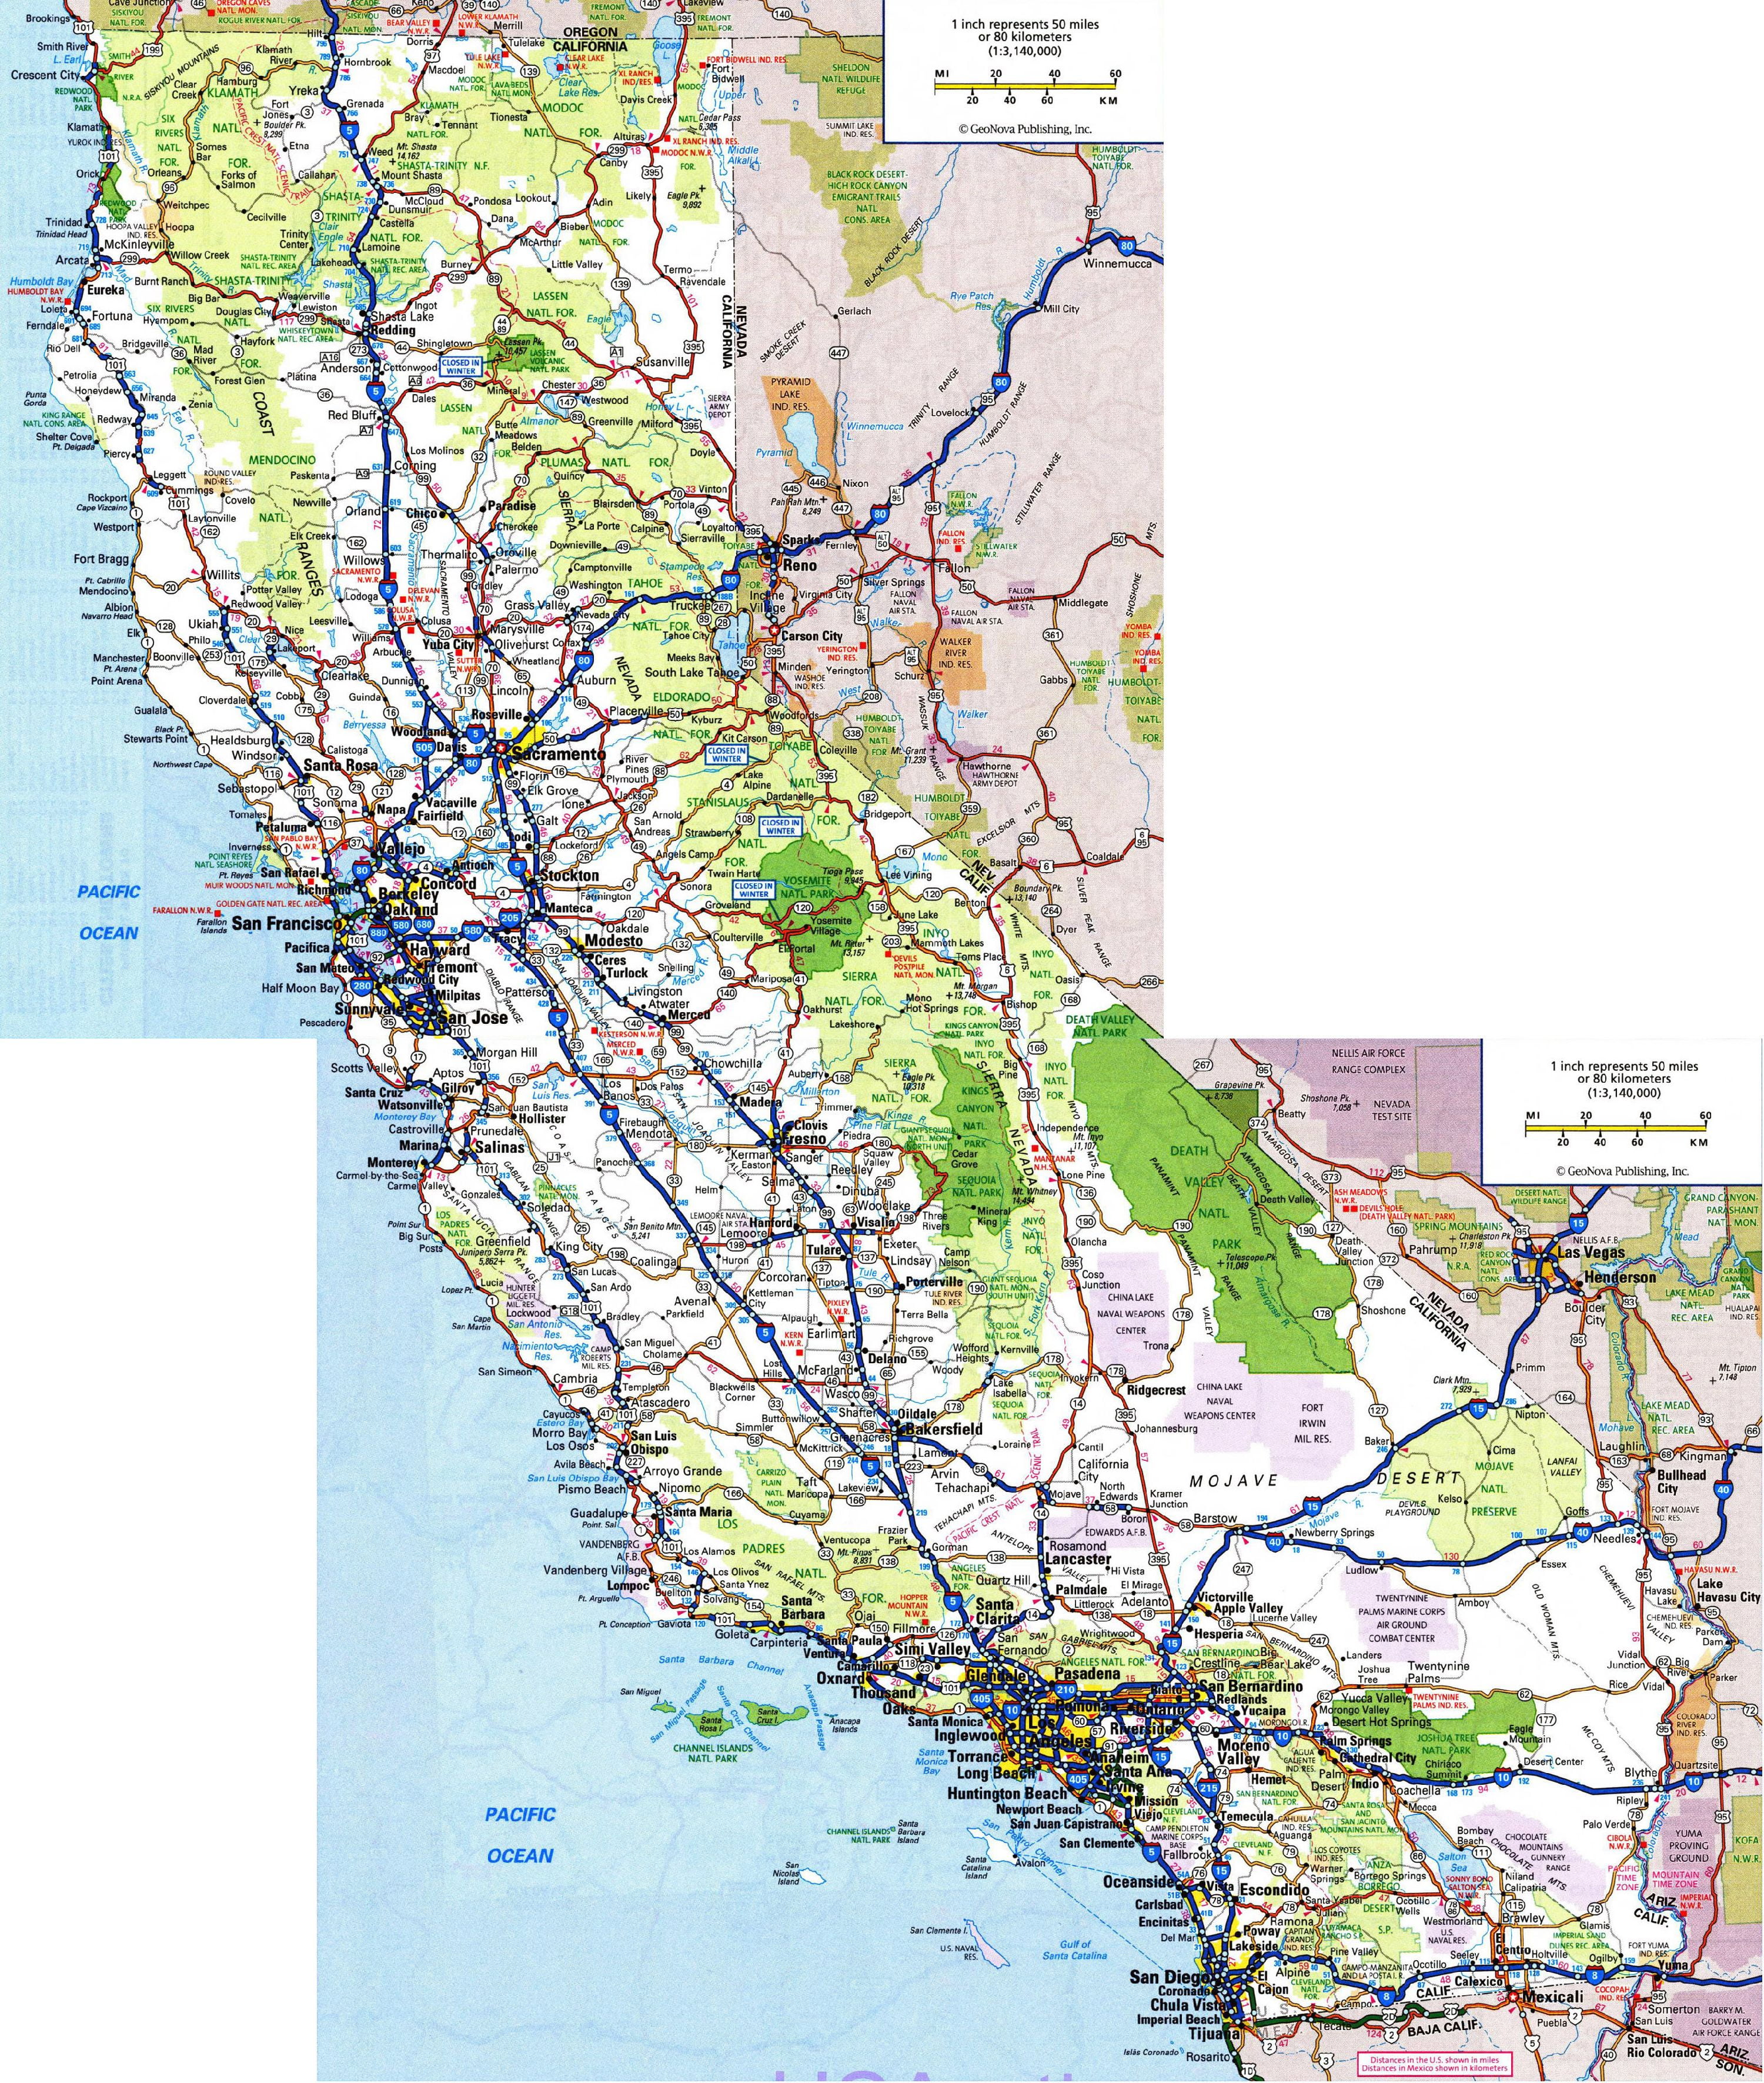 map-california-parks-topographic-map-of-usa-with-states